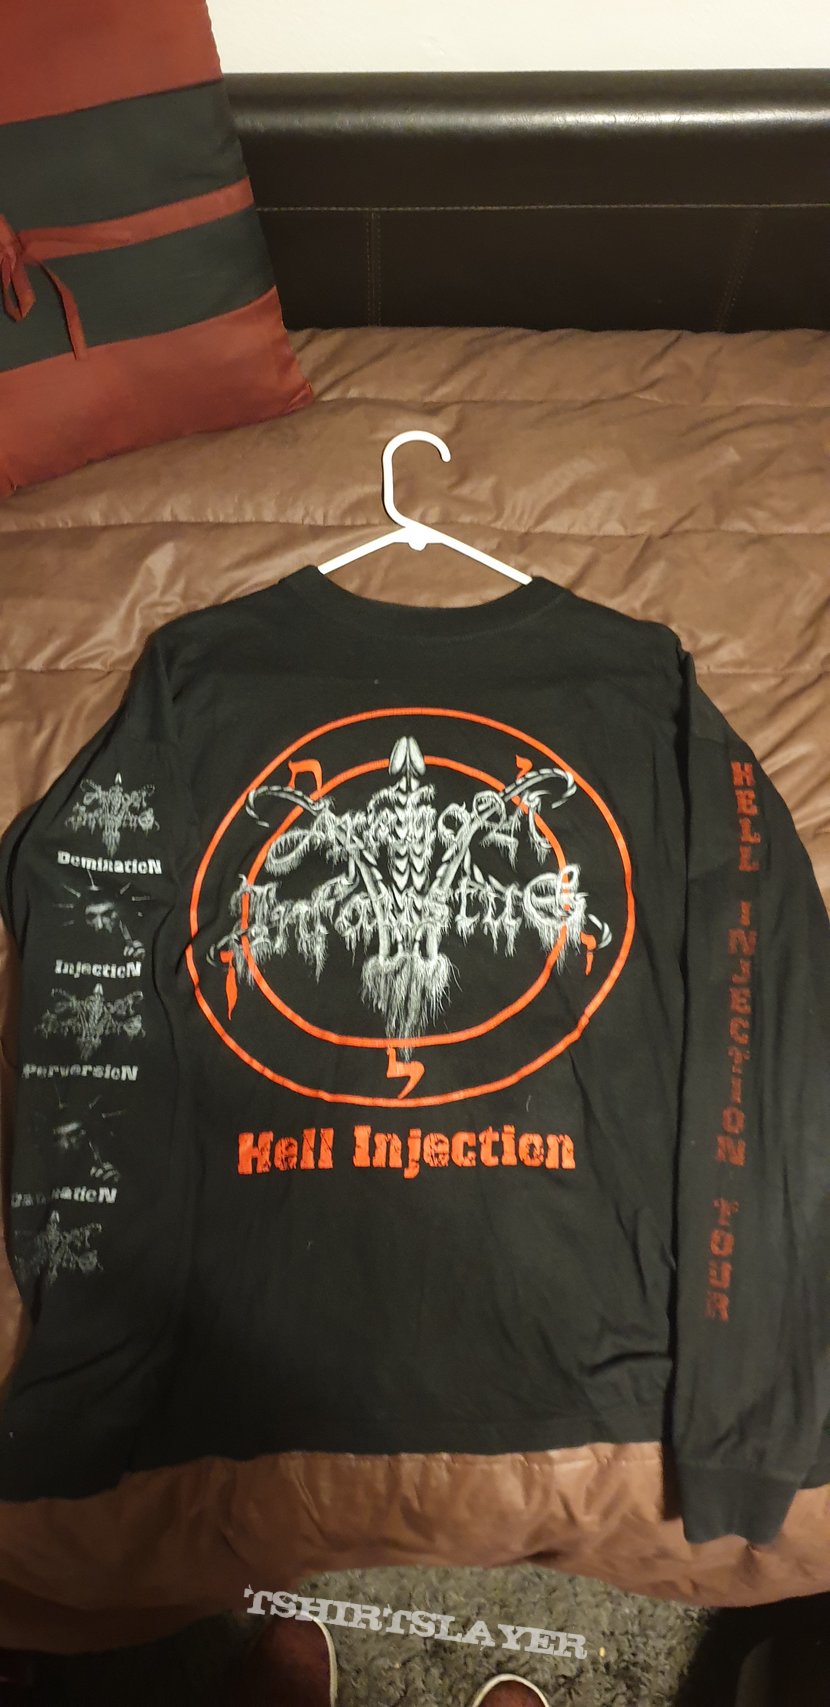 Arkhon infaustus - Hell Injection Europe tour 2002